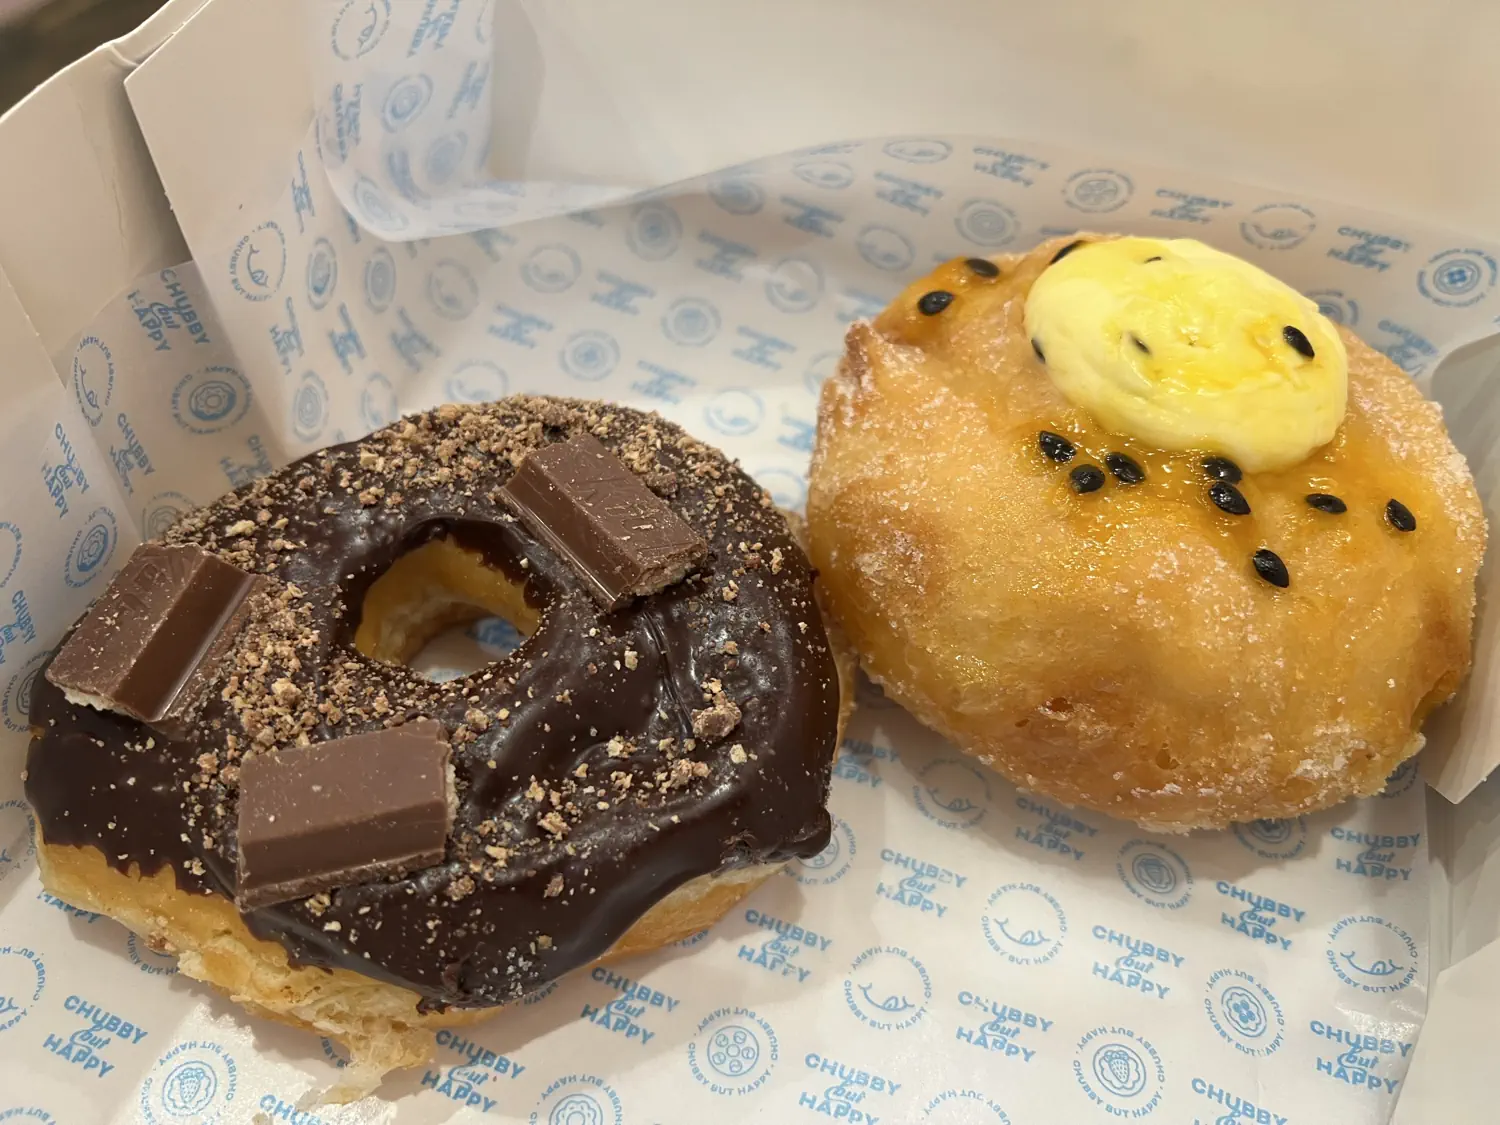 Passionfruit Cream Cheese Donut and Kit Kat Chocolate Donut from Chubby Baker